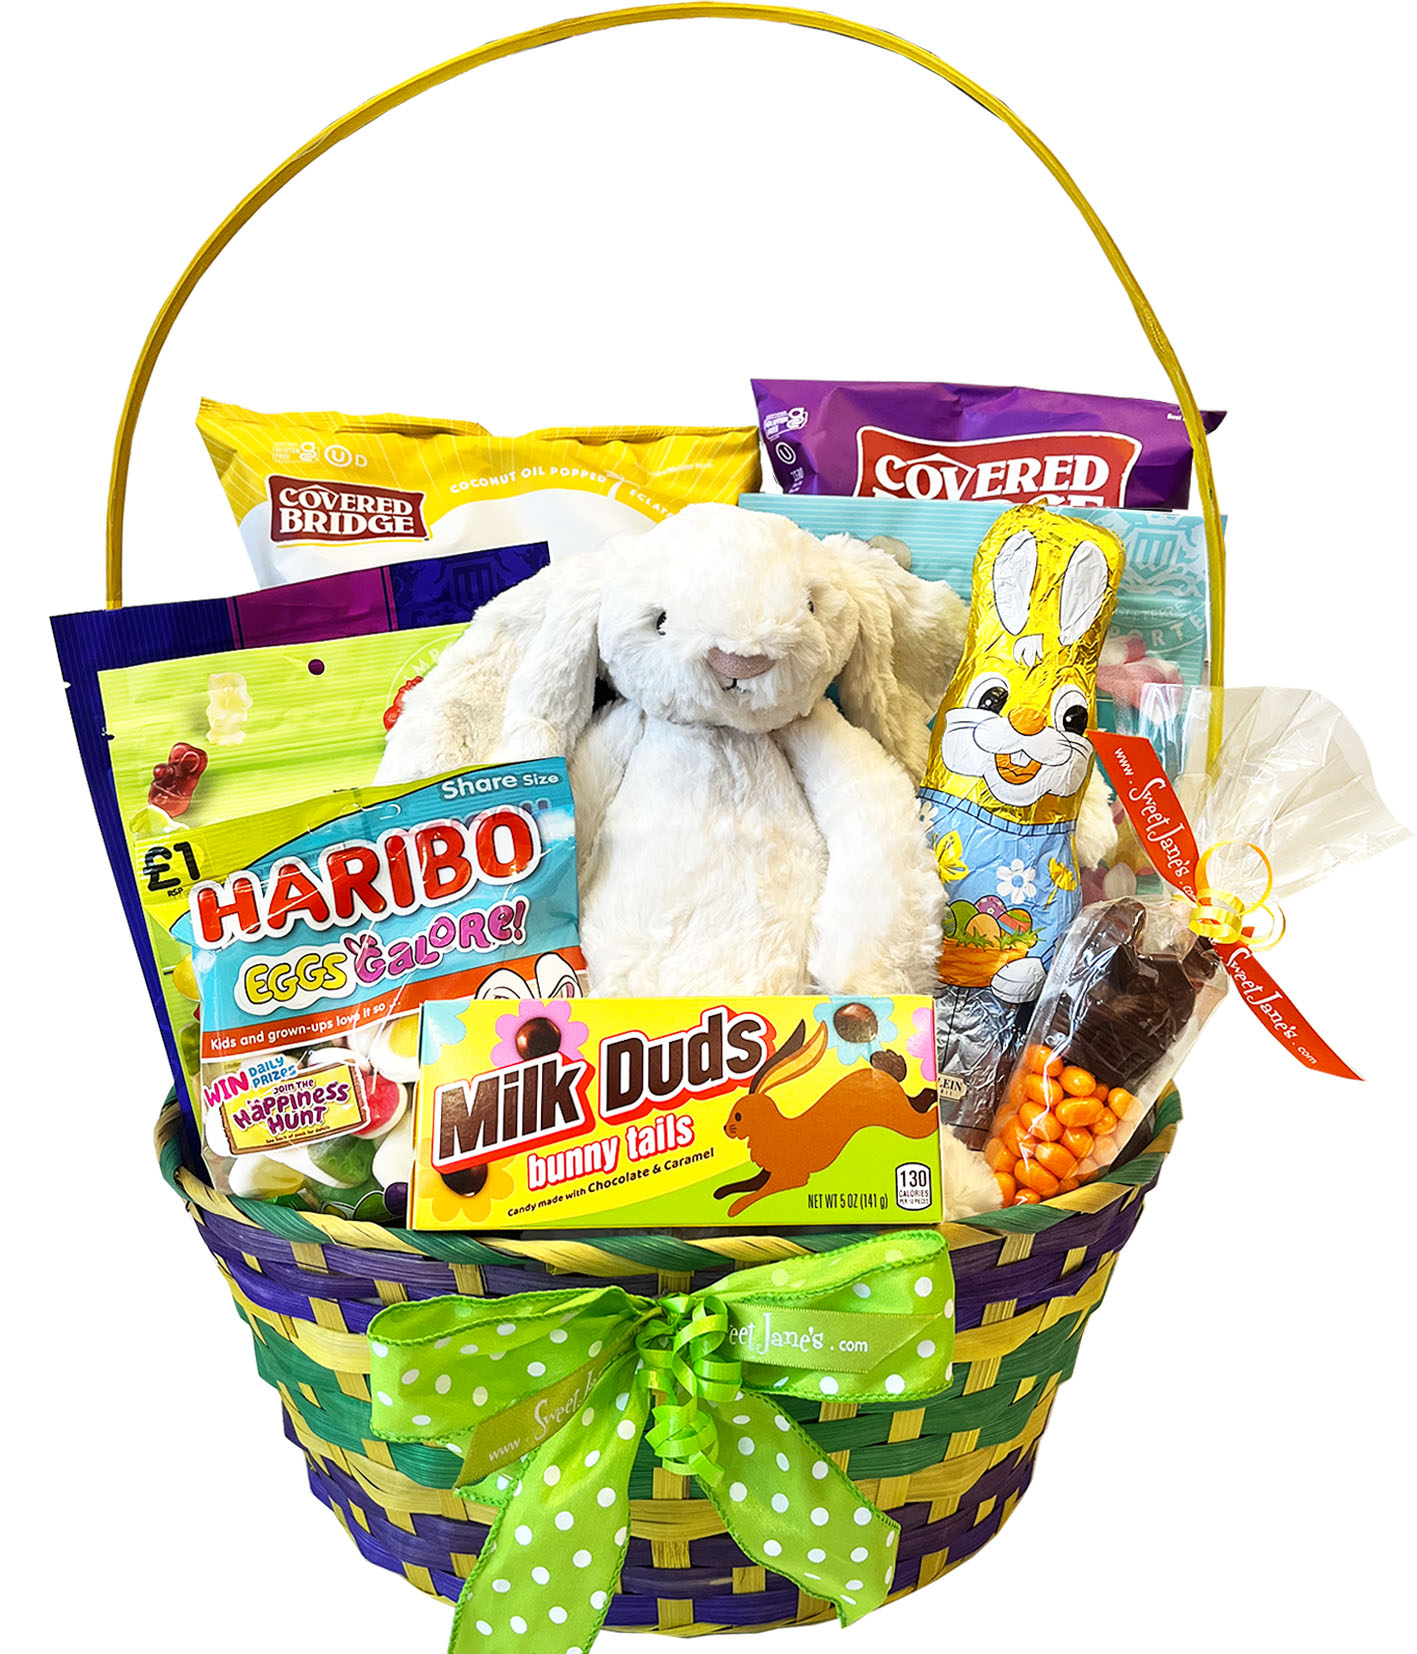 Colour My World Gift Basket